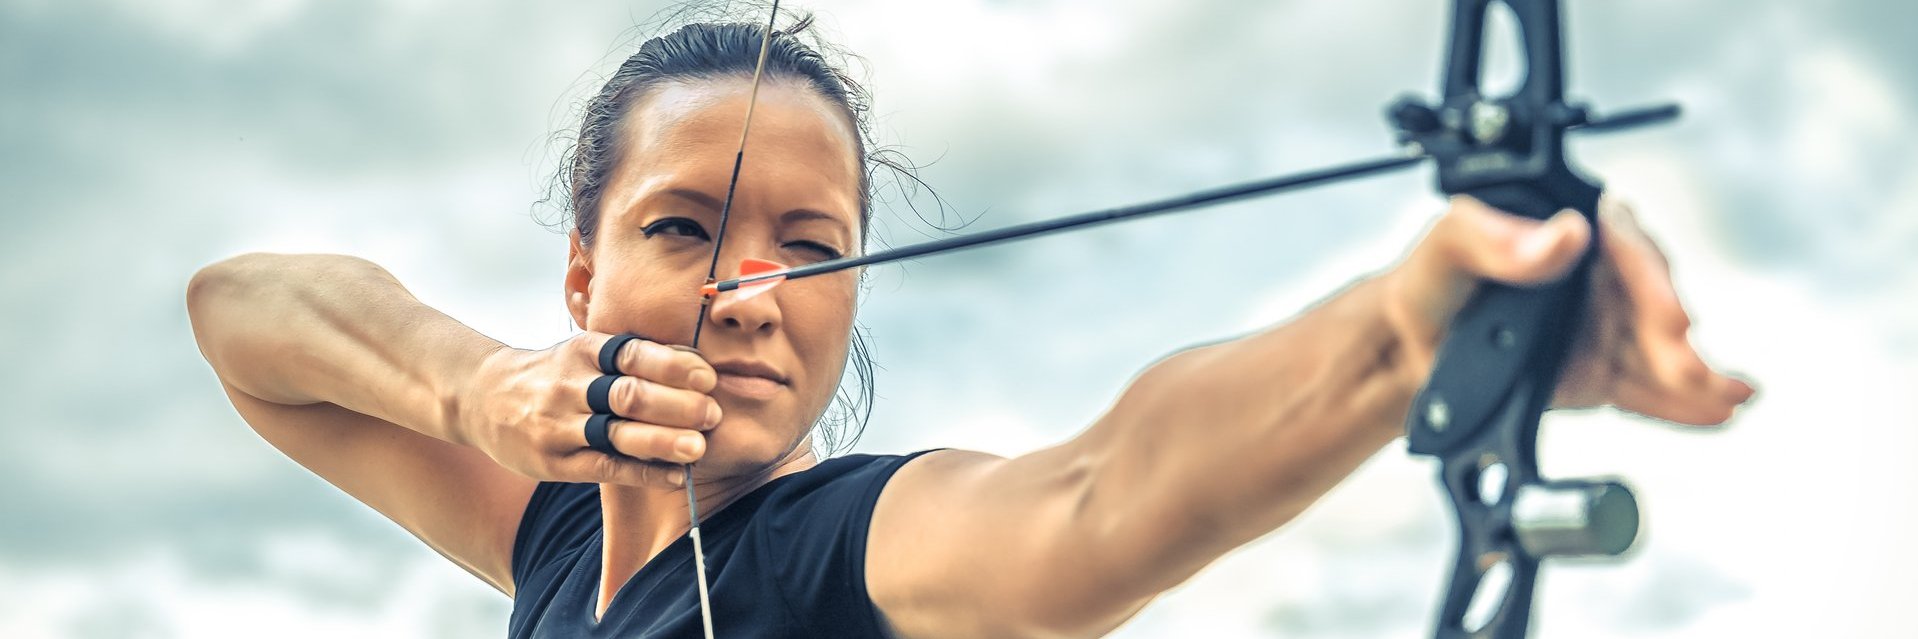 attractive-woman-archery-focuses-eye-target-arrow-from-bow